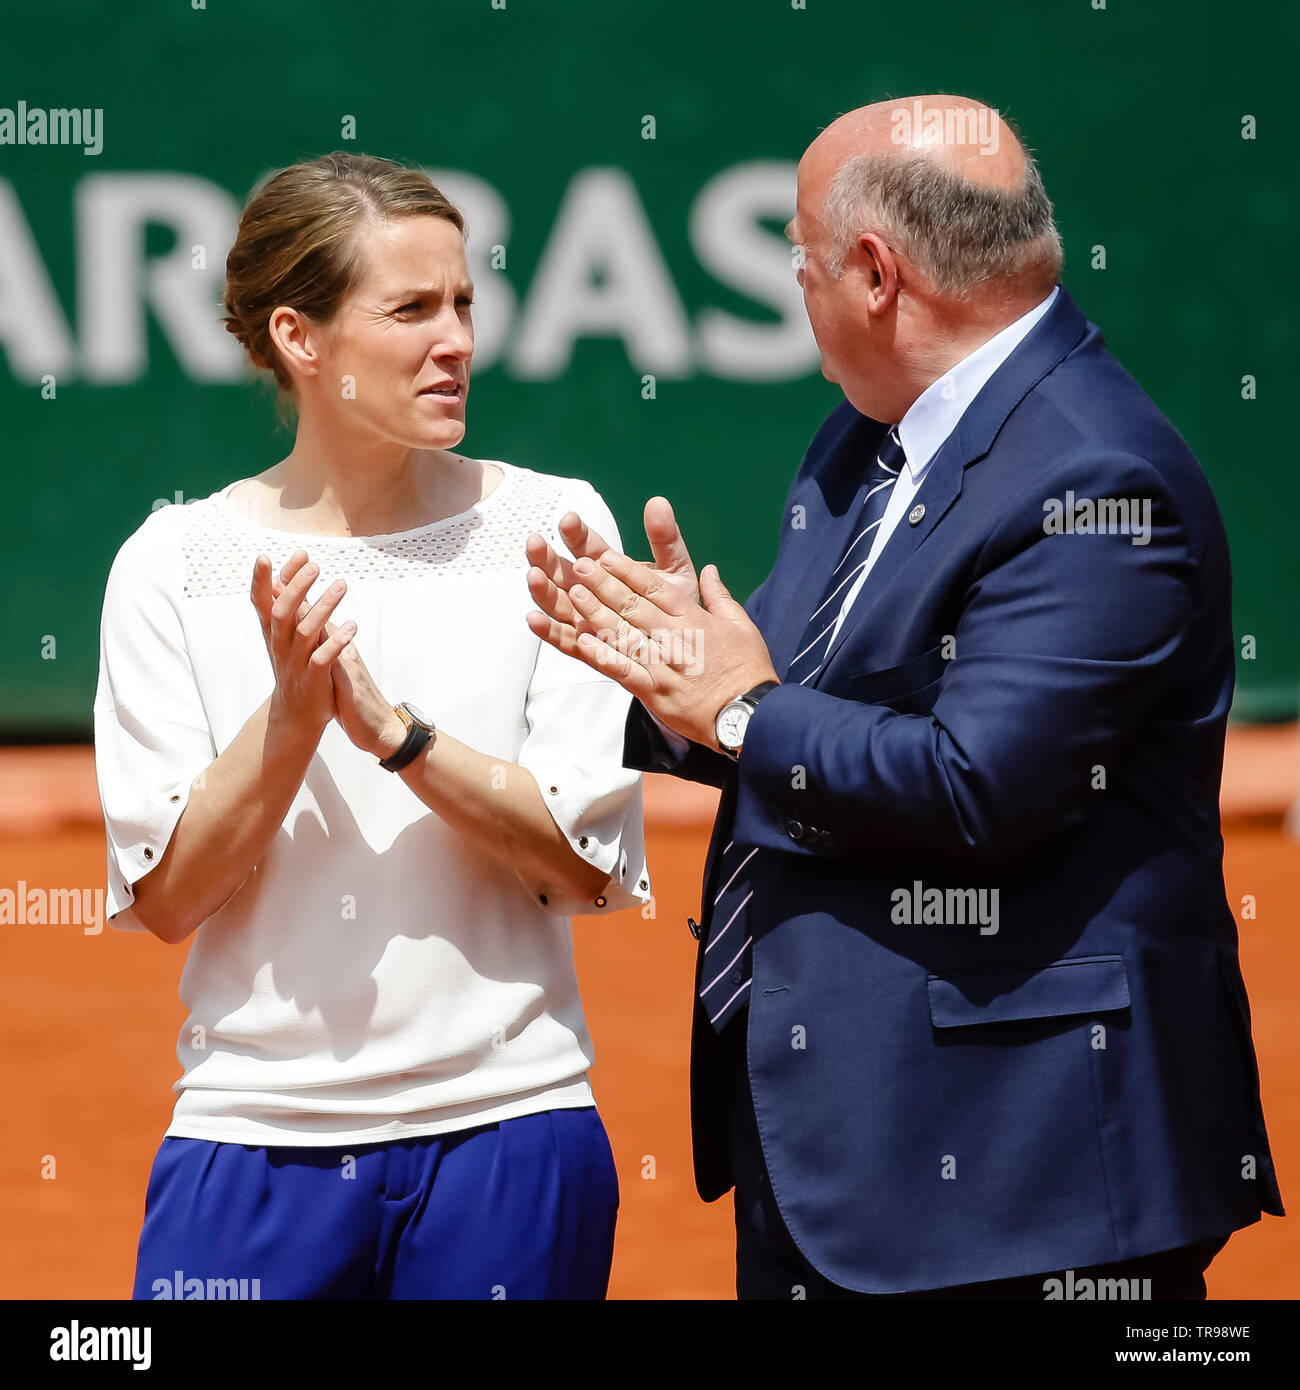 Paris, France. 31th May, 2019. Justine Henin (l) from Belgium stands next to FFT President, Bernard Giudicelli, at the 2019 French Open Grand Slam tennis tournament in Roland Garros, Paris, France. Frank Molter/Alamy Live news Stock Photo